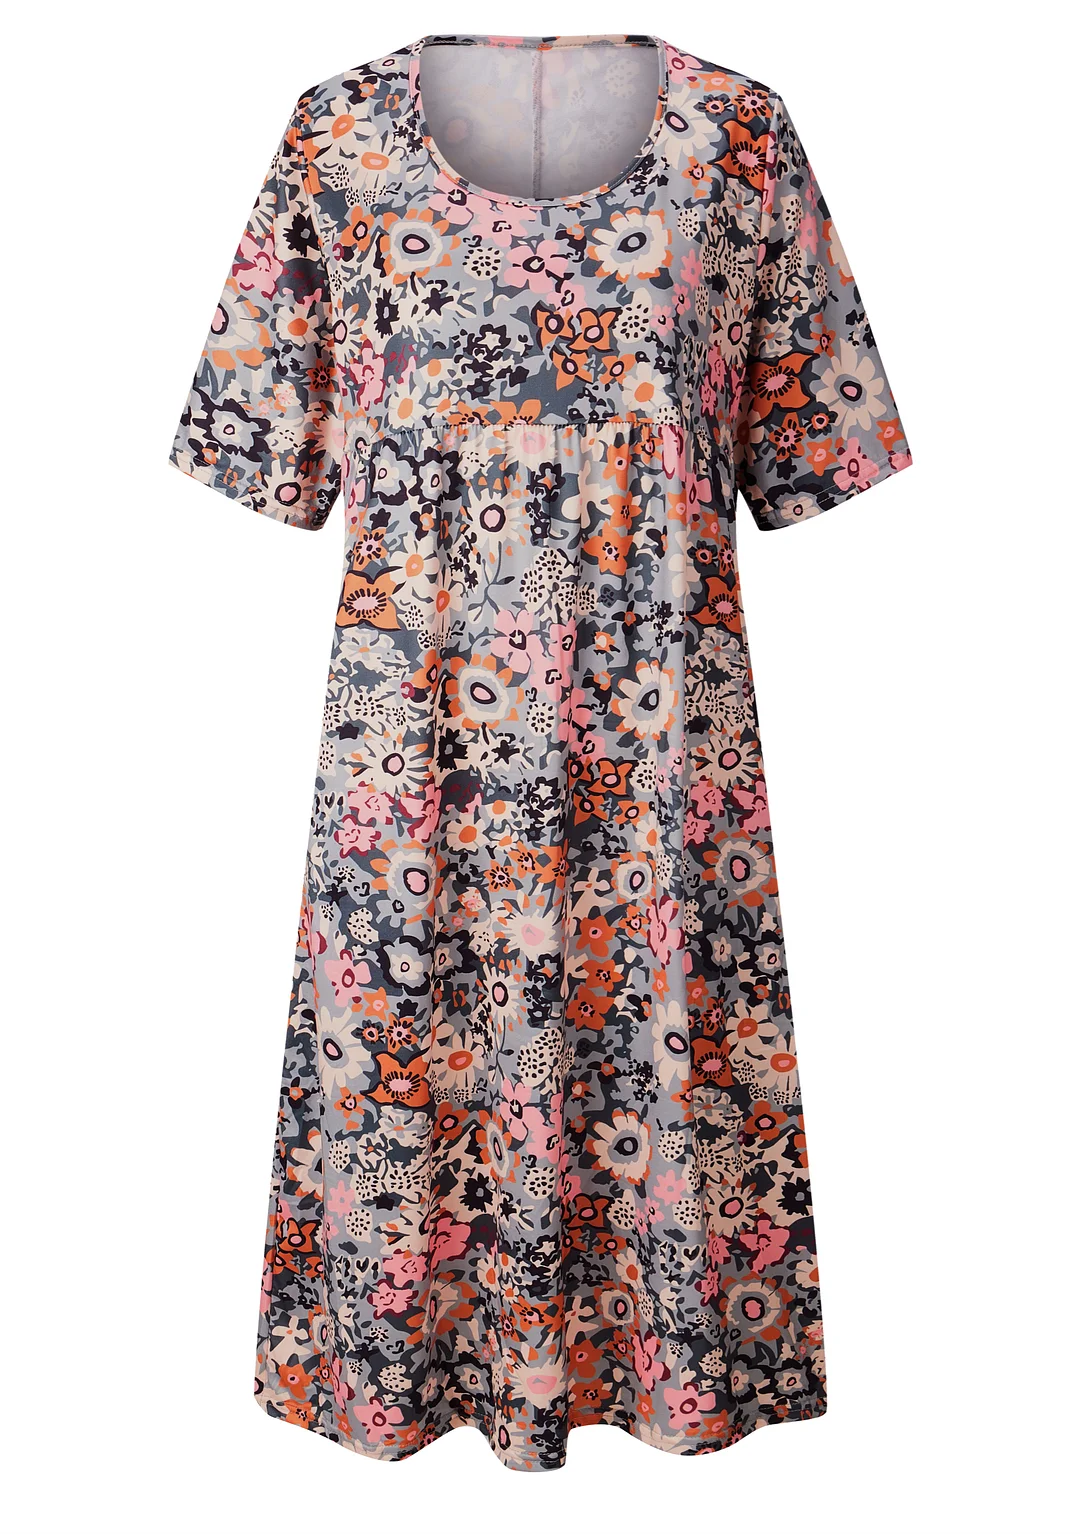 Style & Comfort for Mature Women Women Short Sleeve Scoop Neck Stitching Floral Printed Pockets Midi Dress